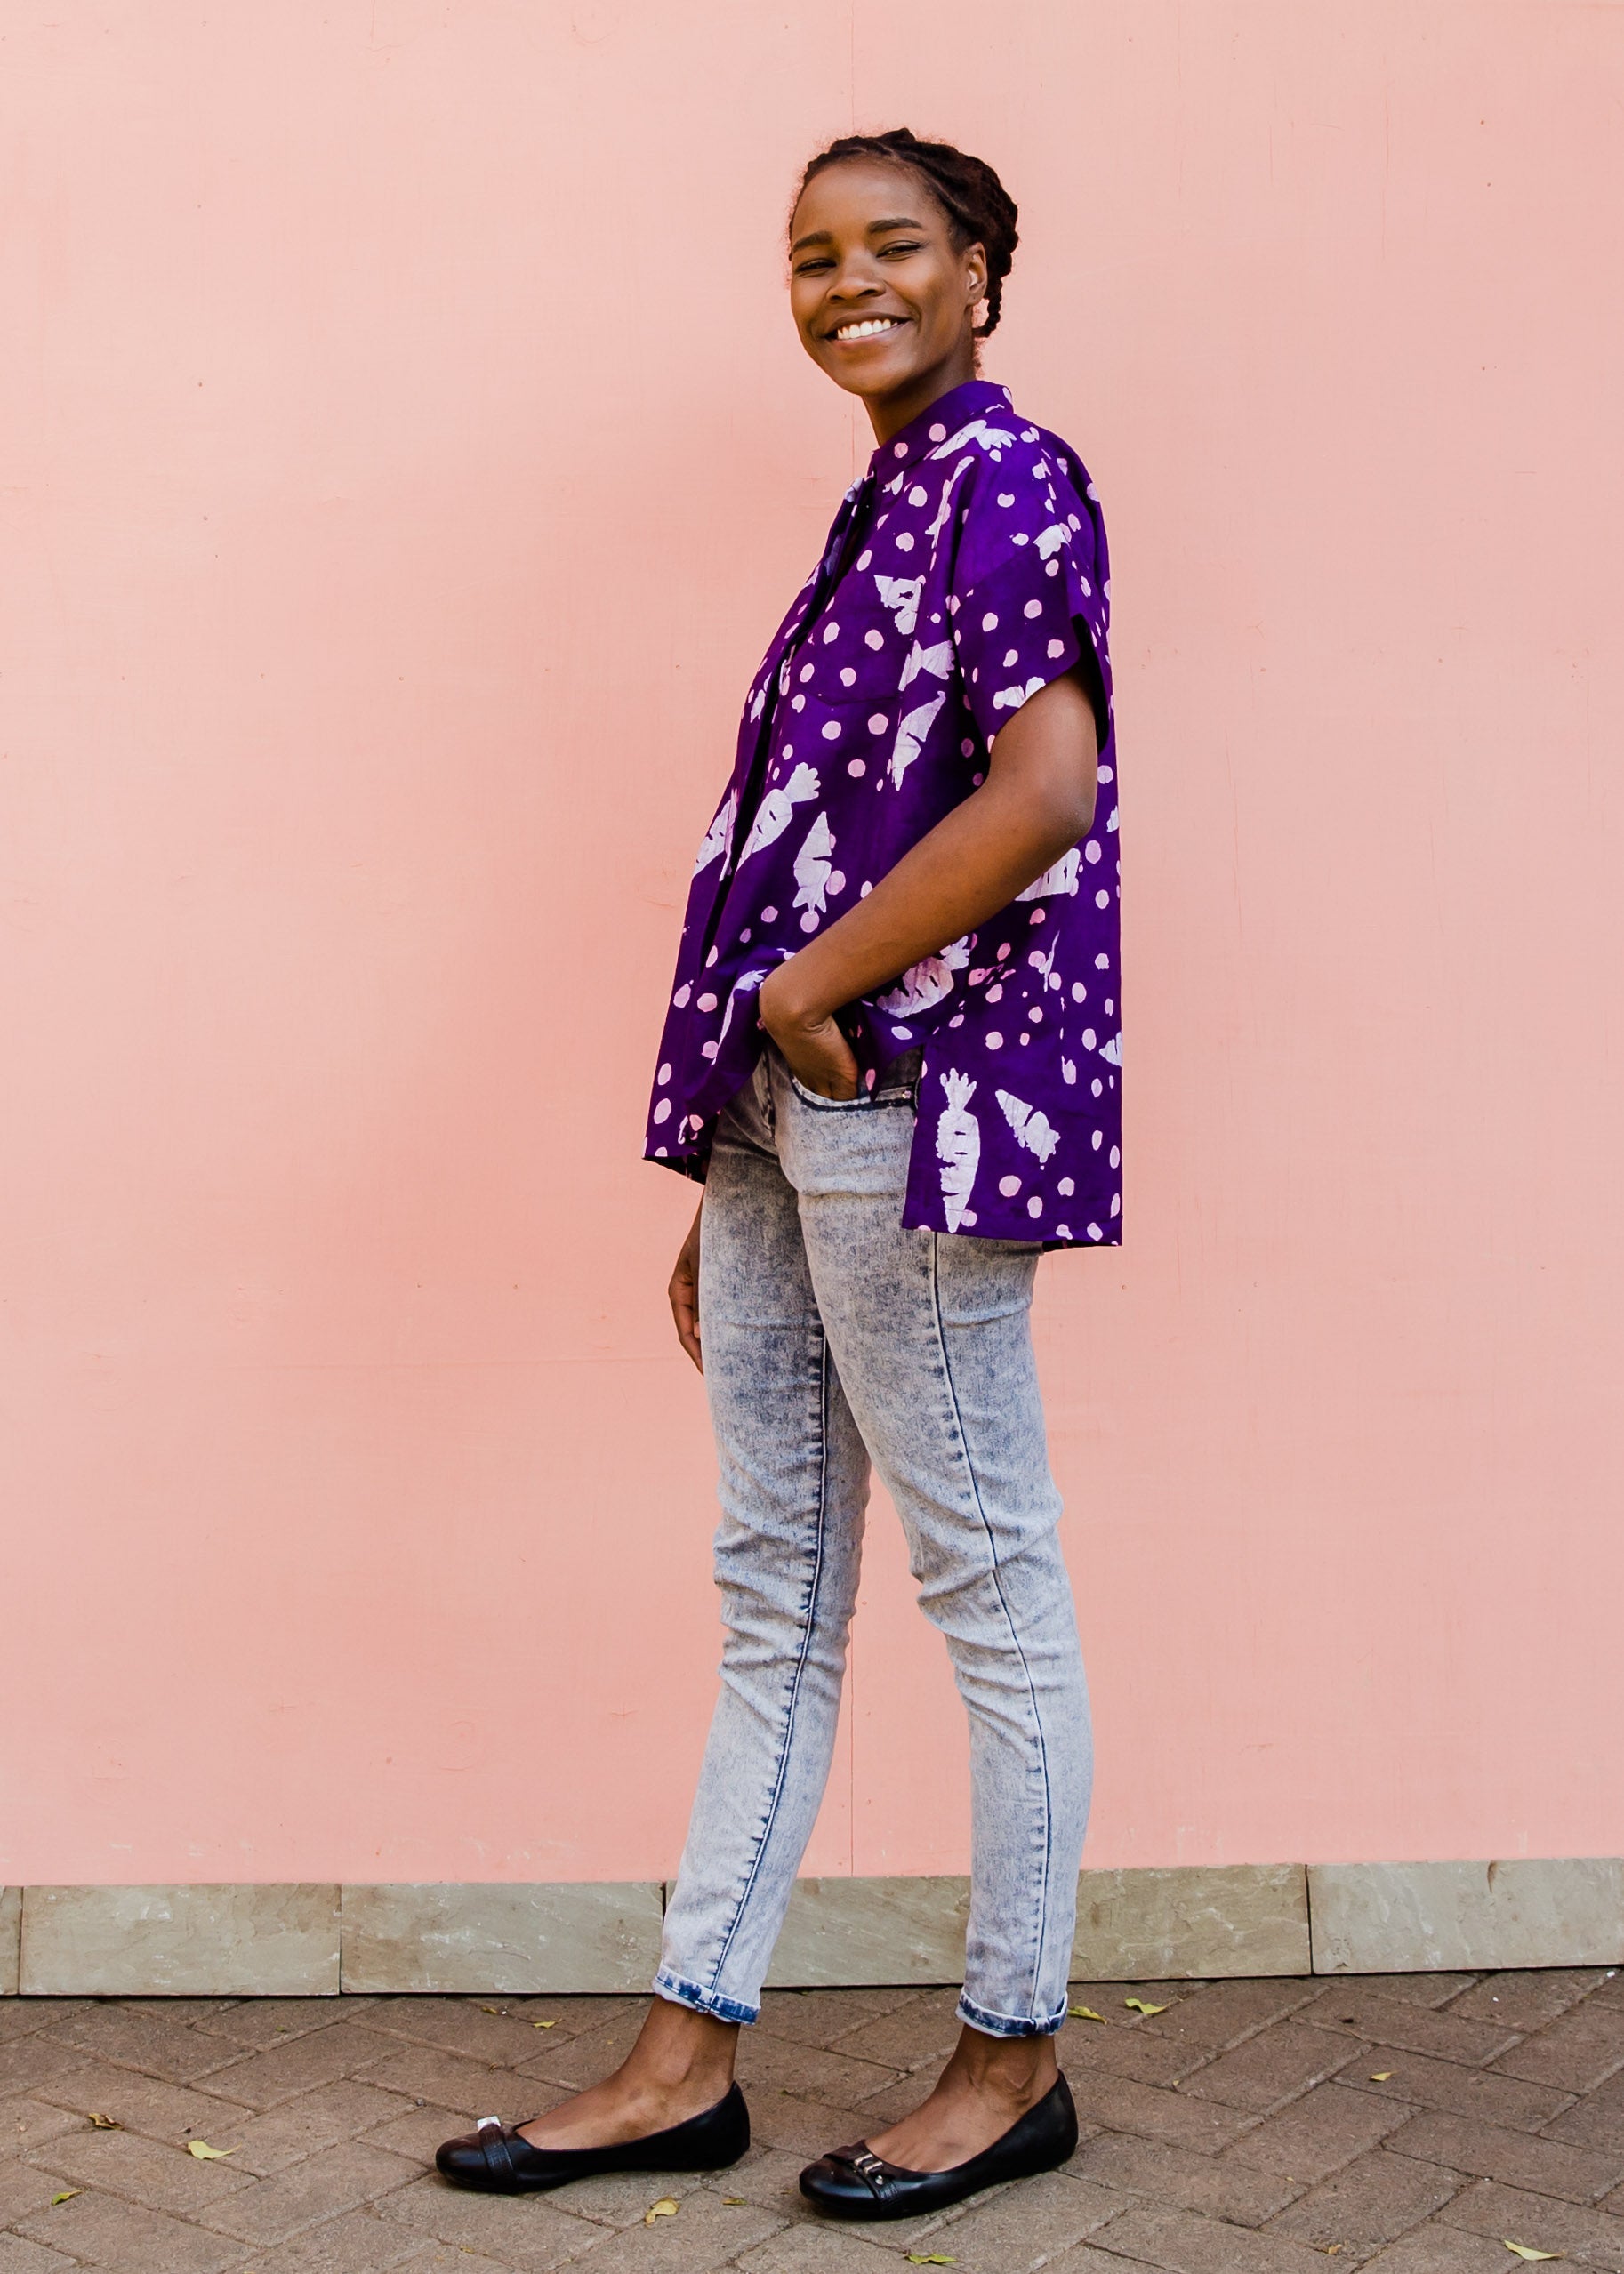 Model wearing purple shirt with white carrot print, paired with jeans and black flats.